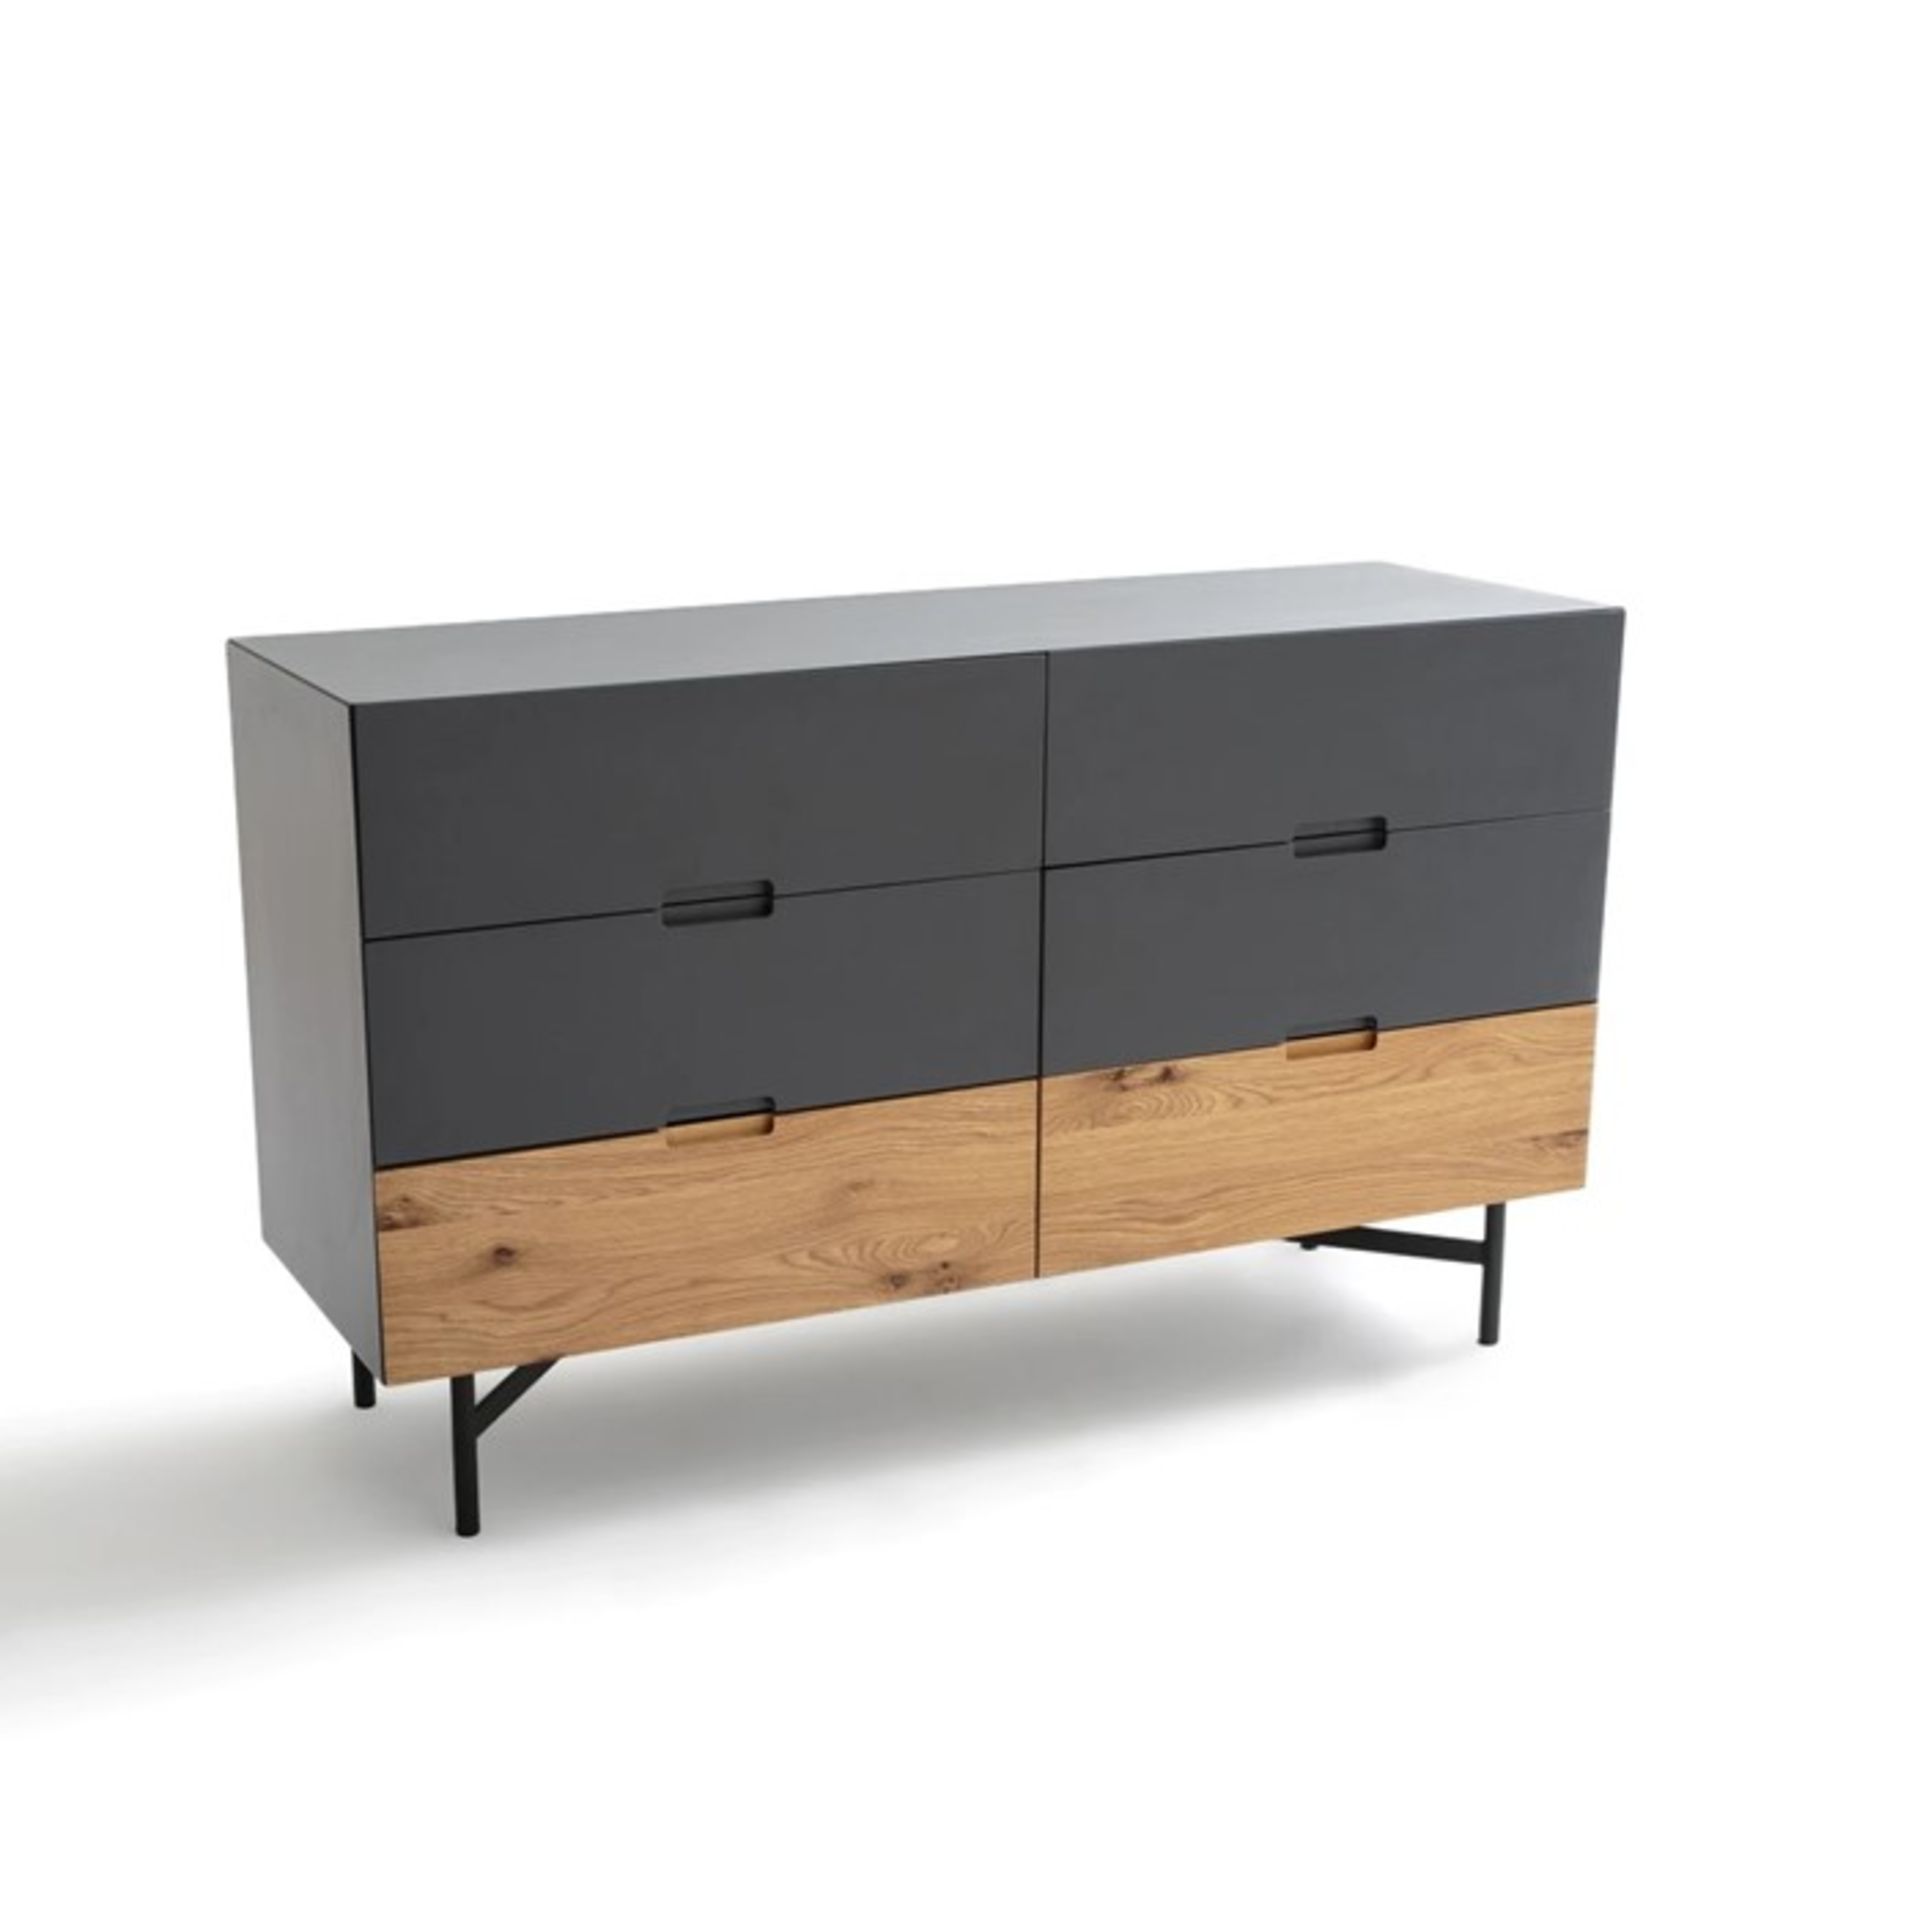 1 GRADE B BOXED LA REDOUTE LORA CHEST OF 6 DRAWERS IN GREY / RRP £799.00 (VIEWING HIGHLY